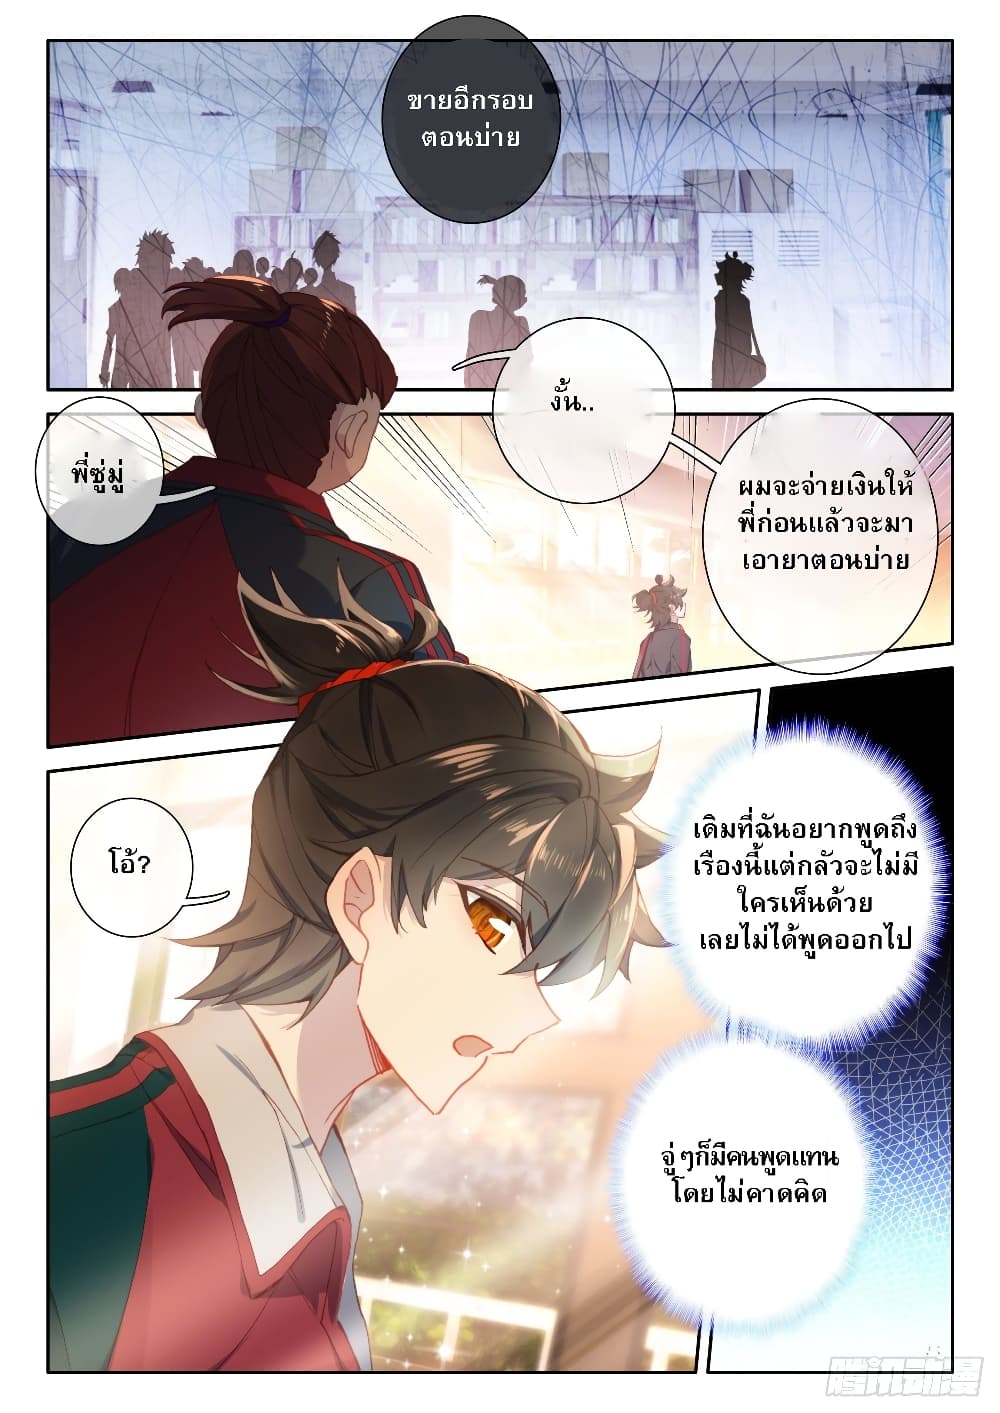 Becoming Immortal by Paying Cash ตอนที่ 6 (14)